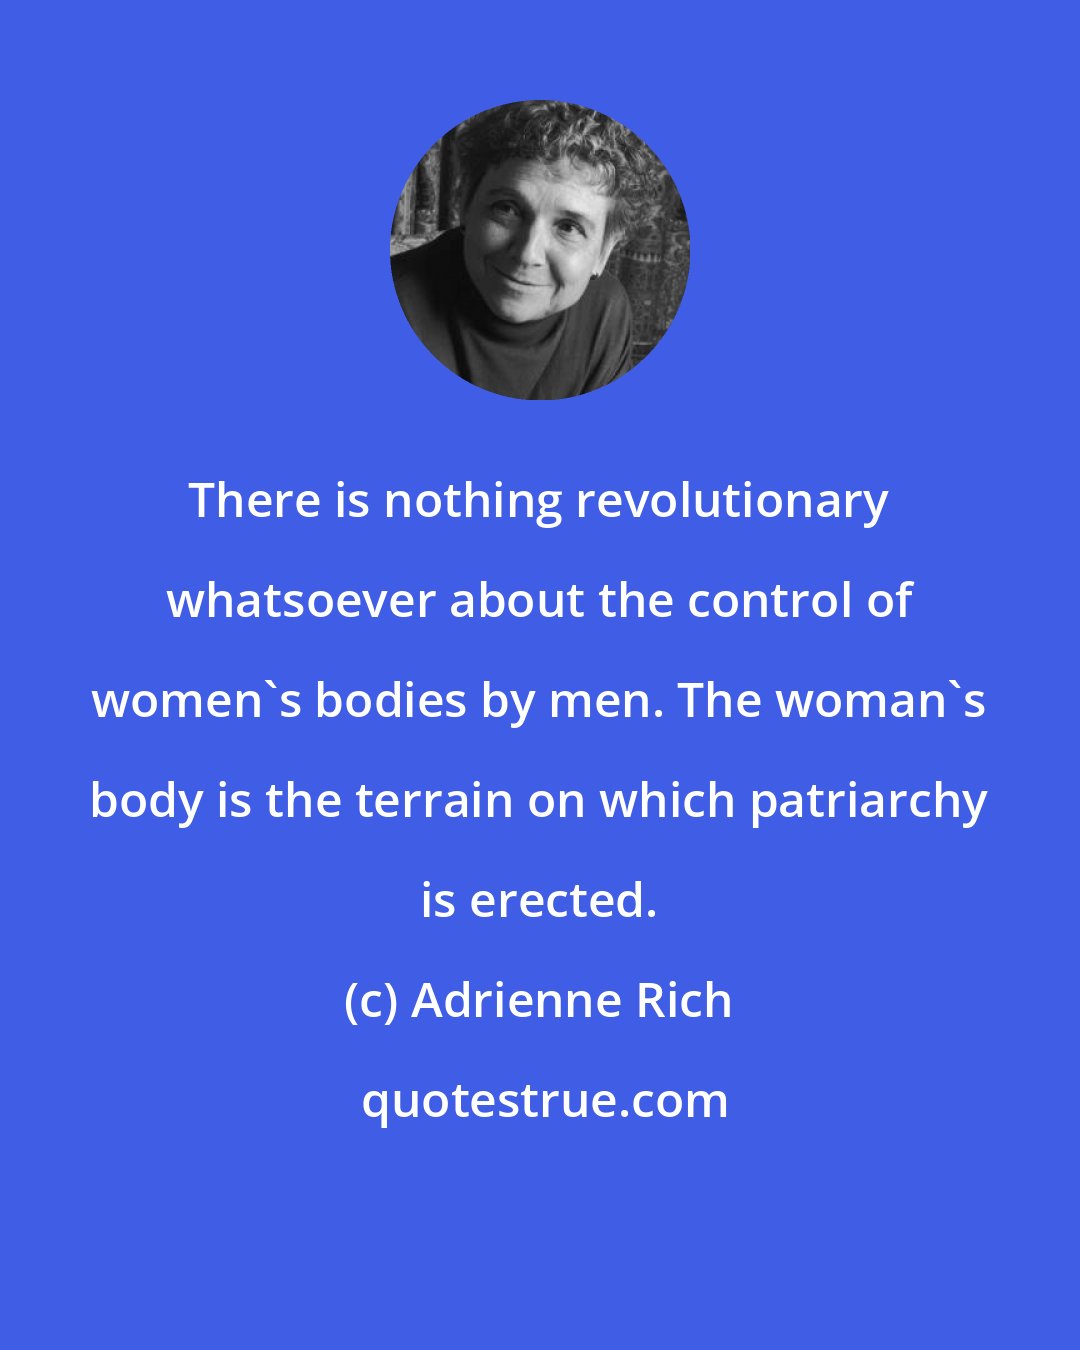 Adrienne Rich: There is nothing revolutionary whatsoever about the control of women's bodies by men. The woman's body is the terrain on which patriarchy is erected.